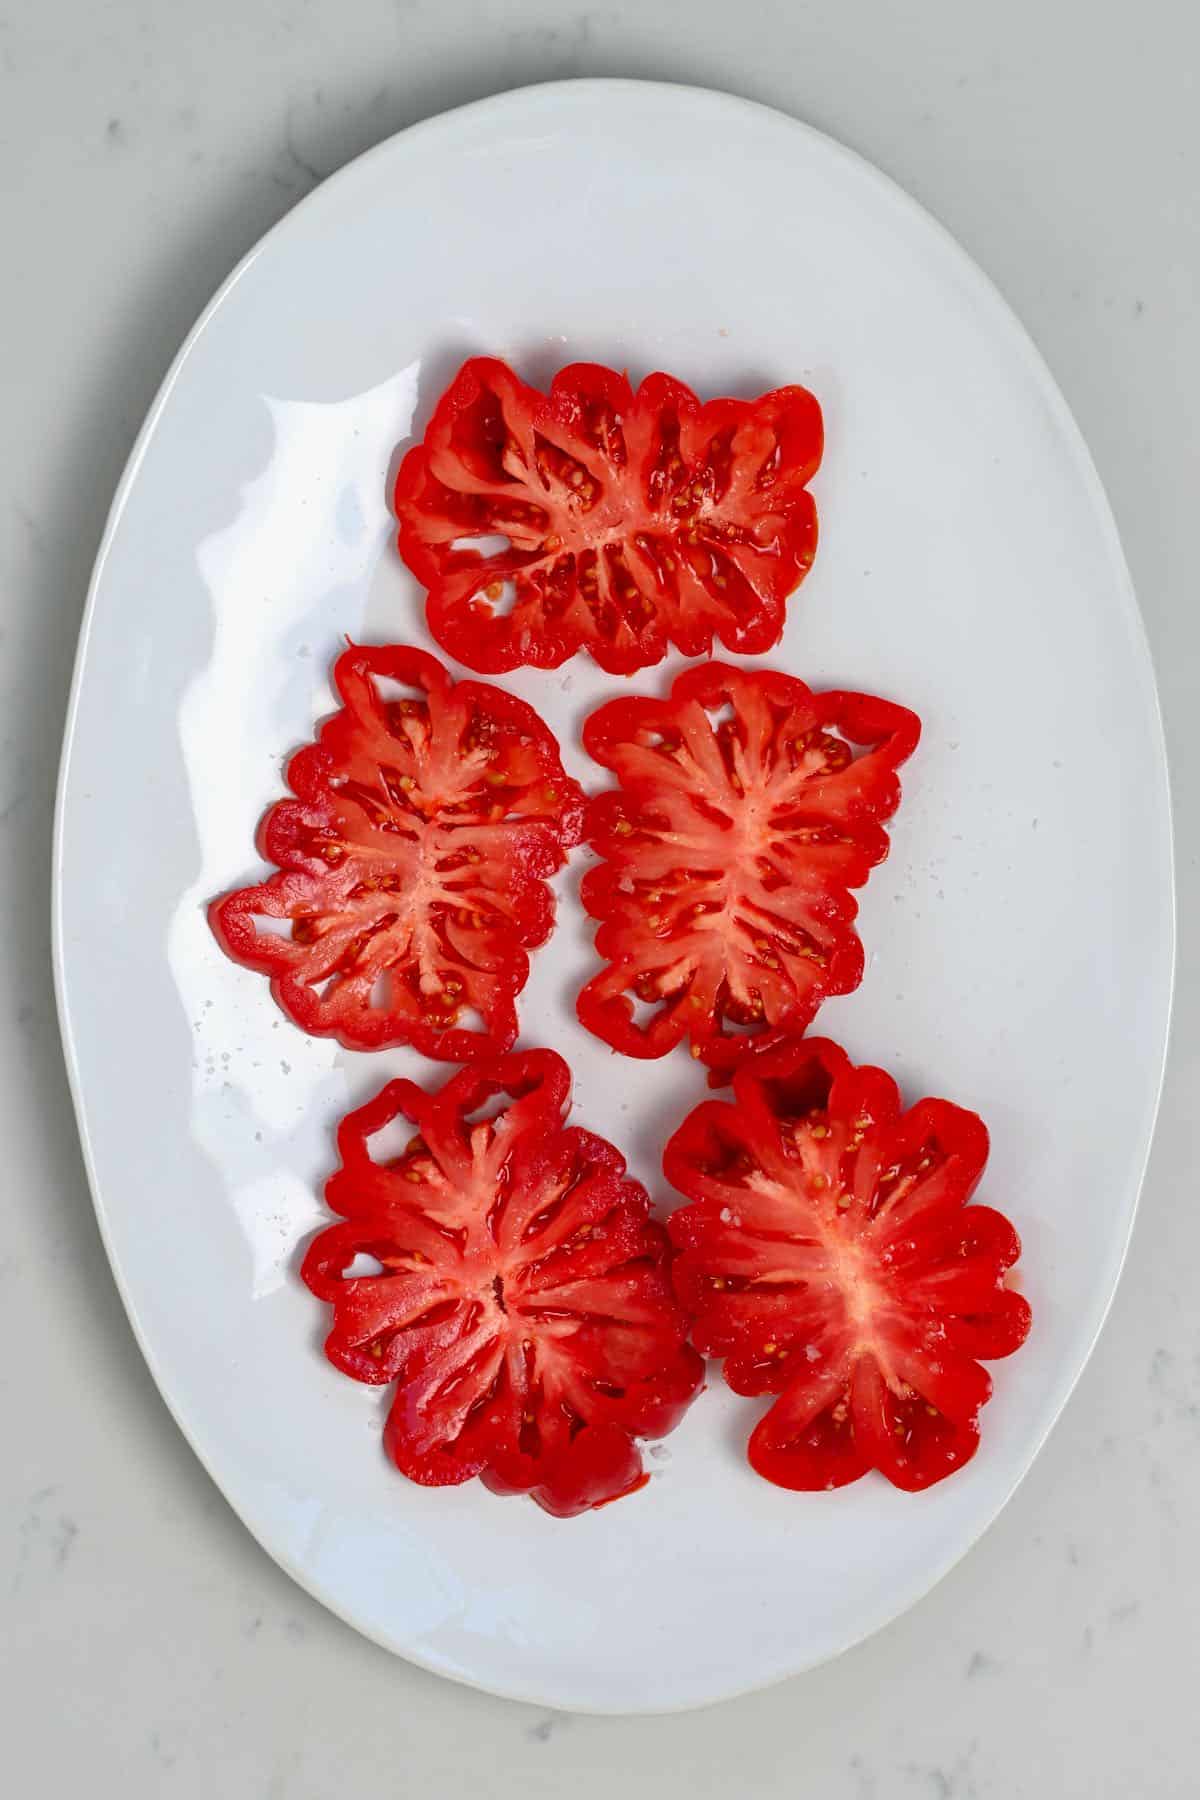 Sliced tomatoes on a plate